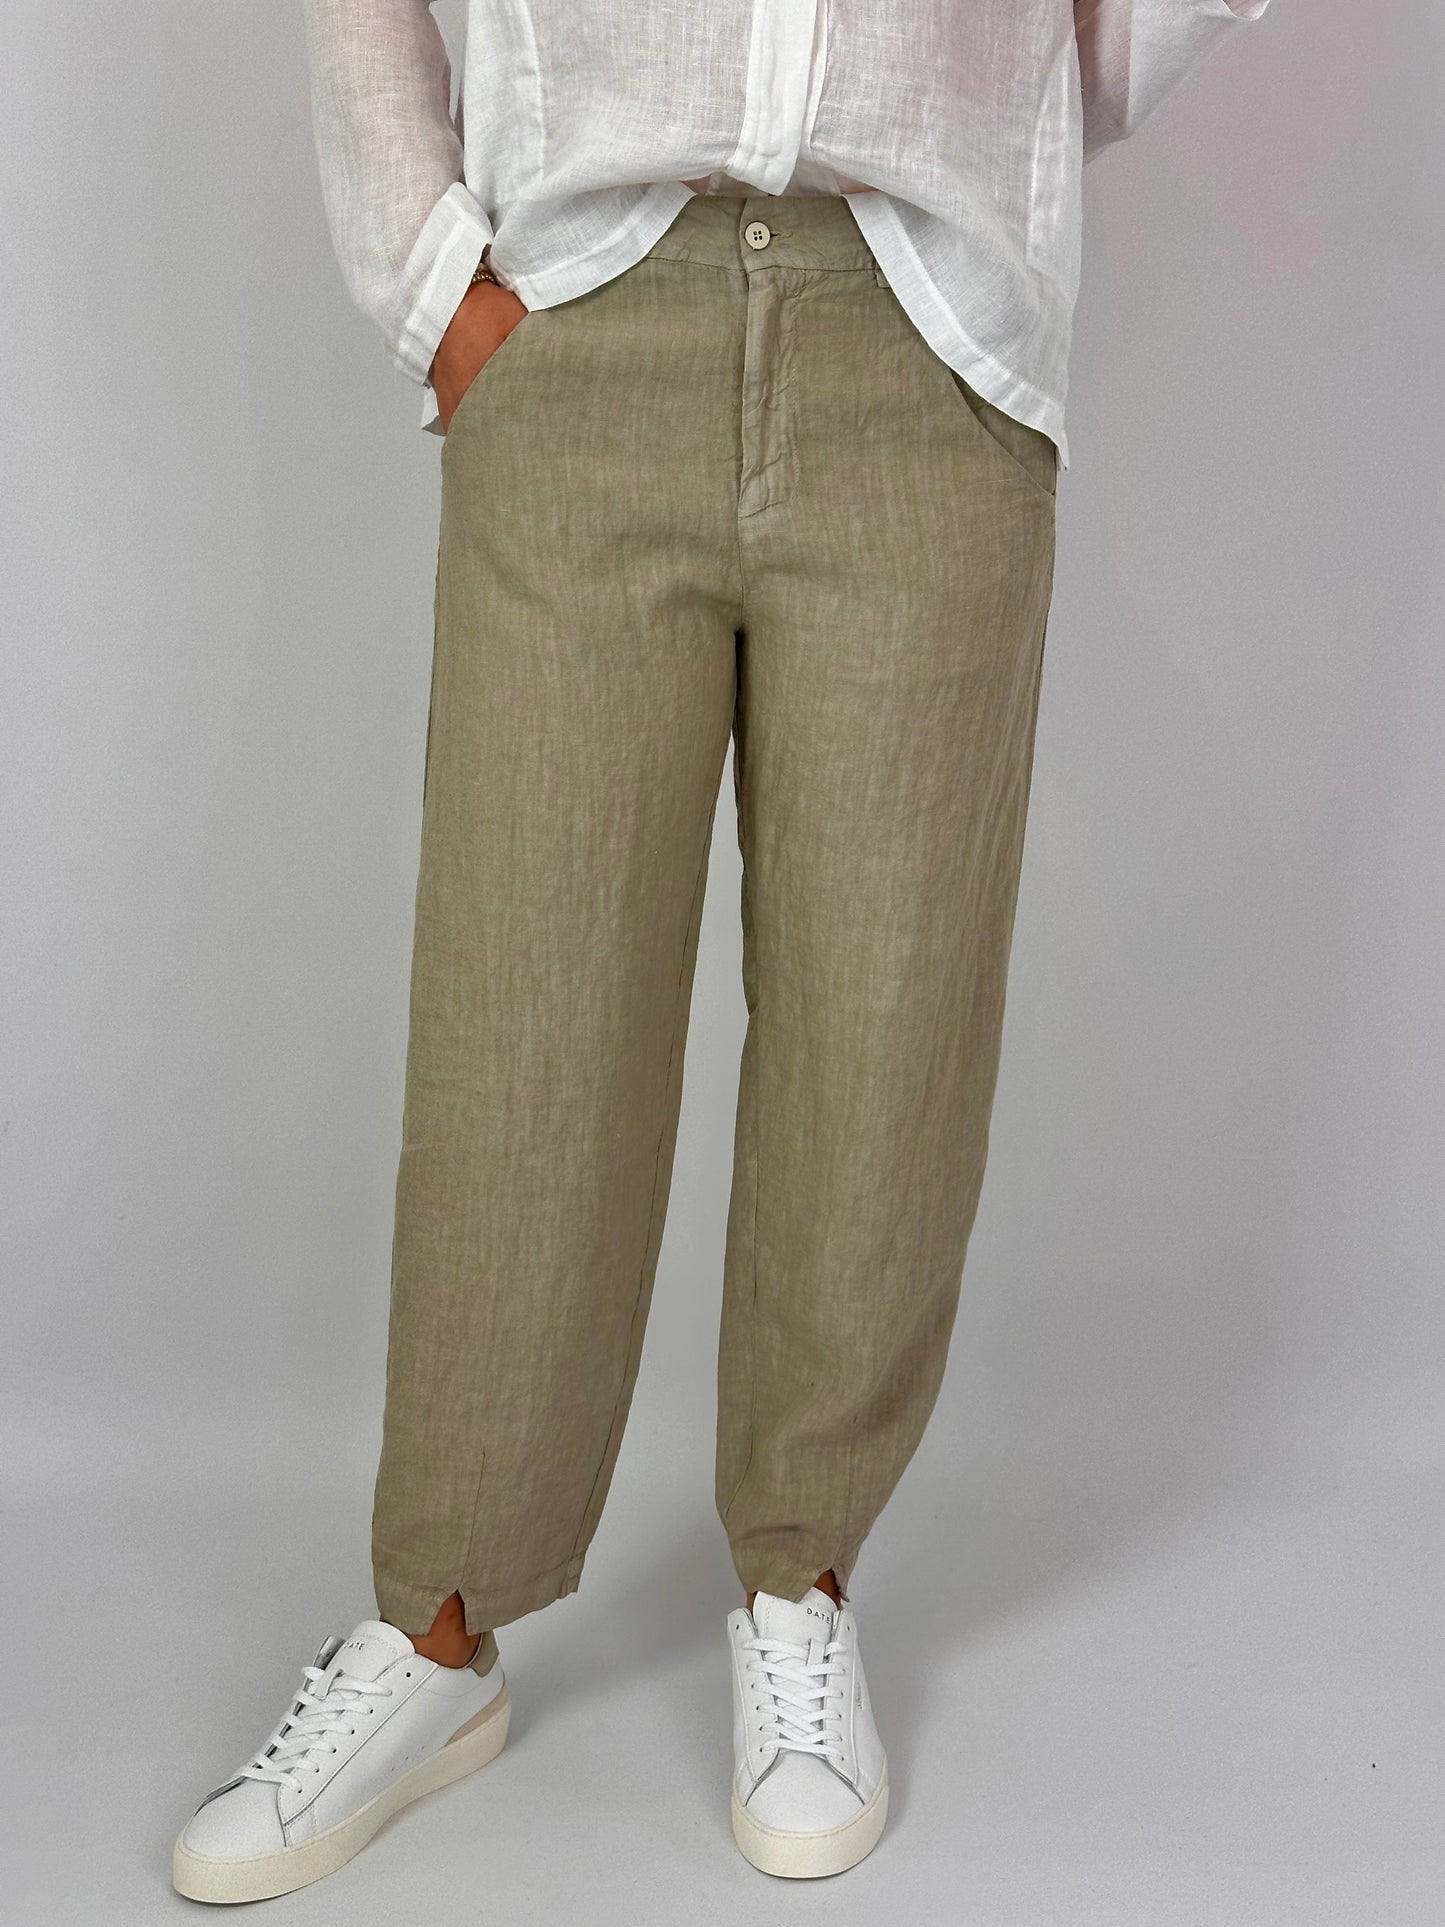 TPS D131 Trousers Pearl Grey